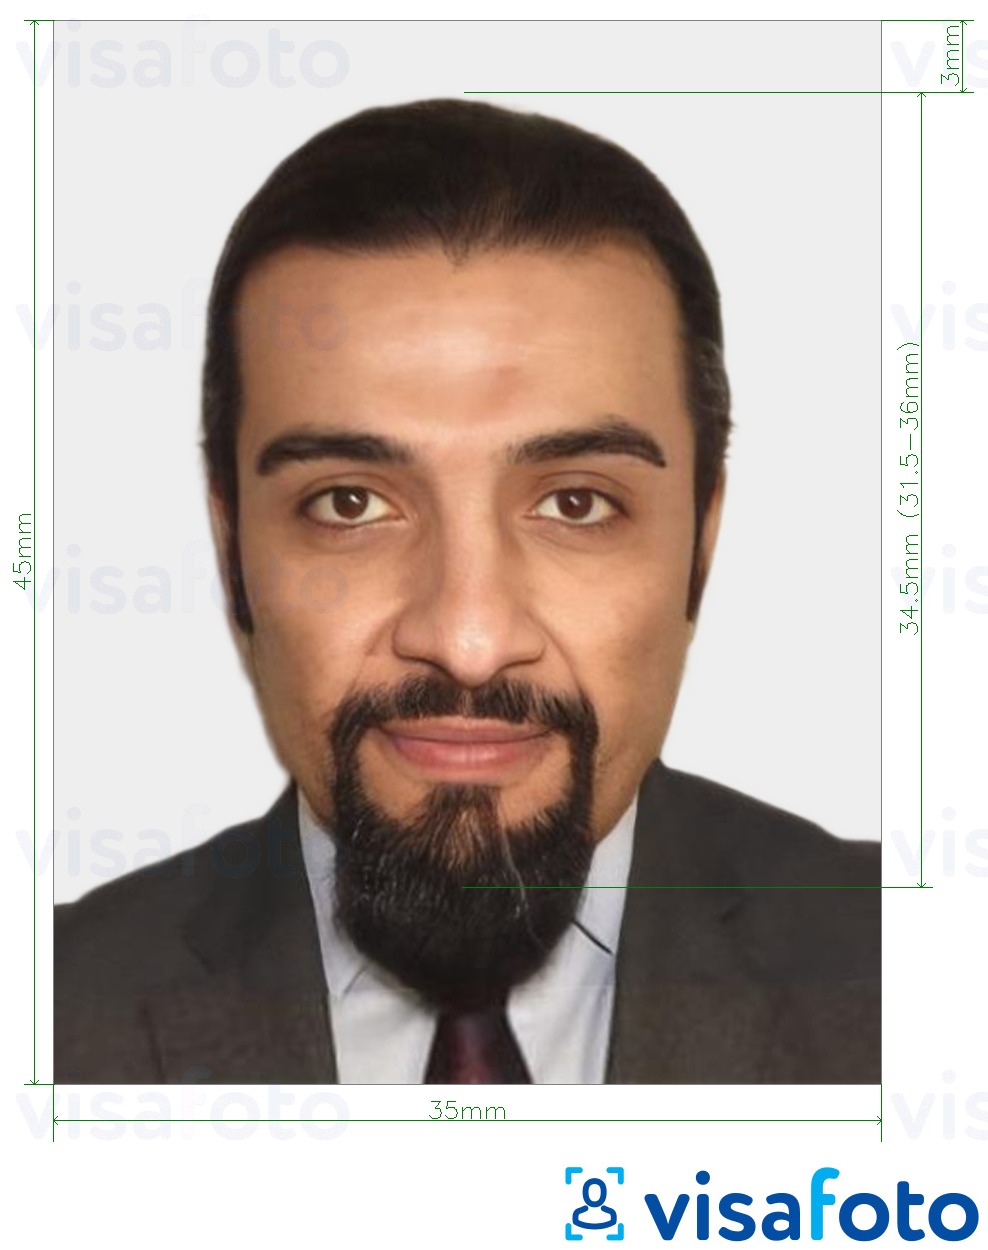 Example of photo for Mauritania visa 35x45 mm (3.5x4.5 cm) with exact size specification